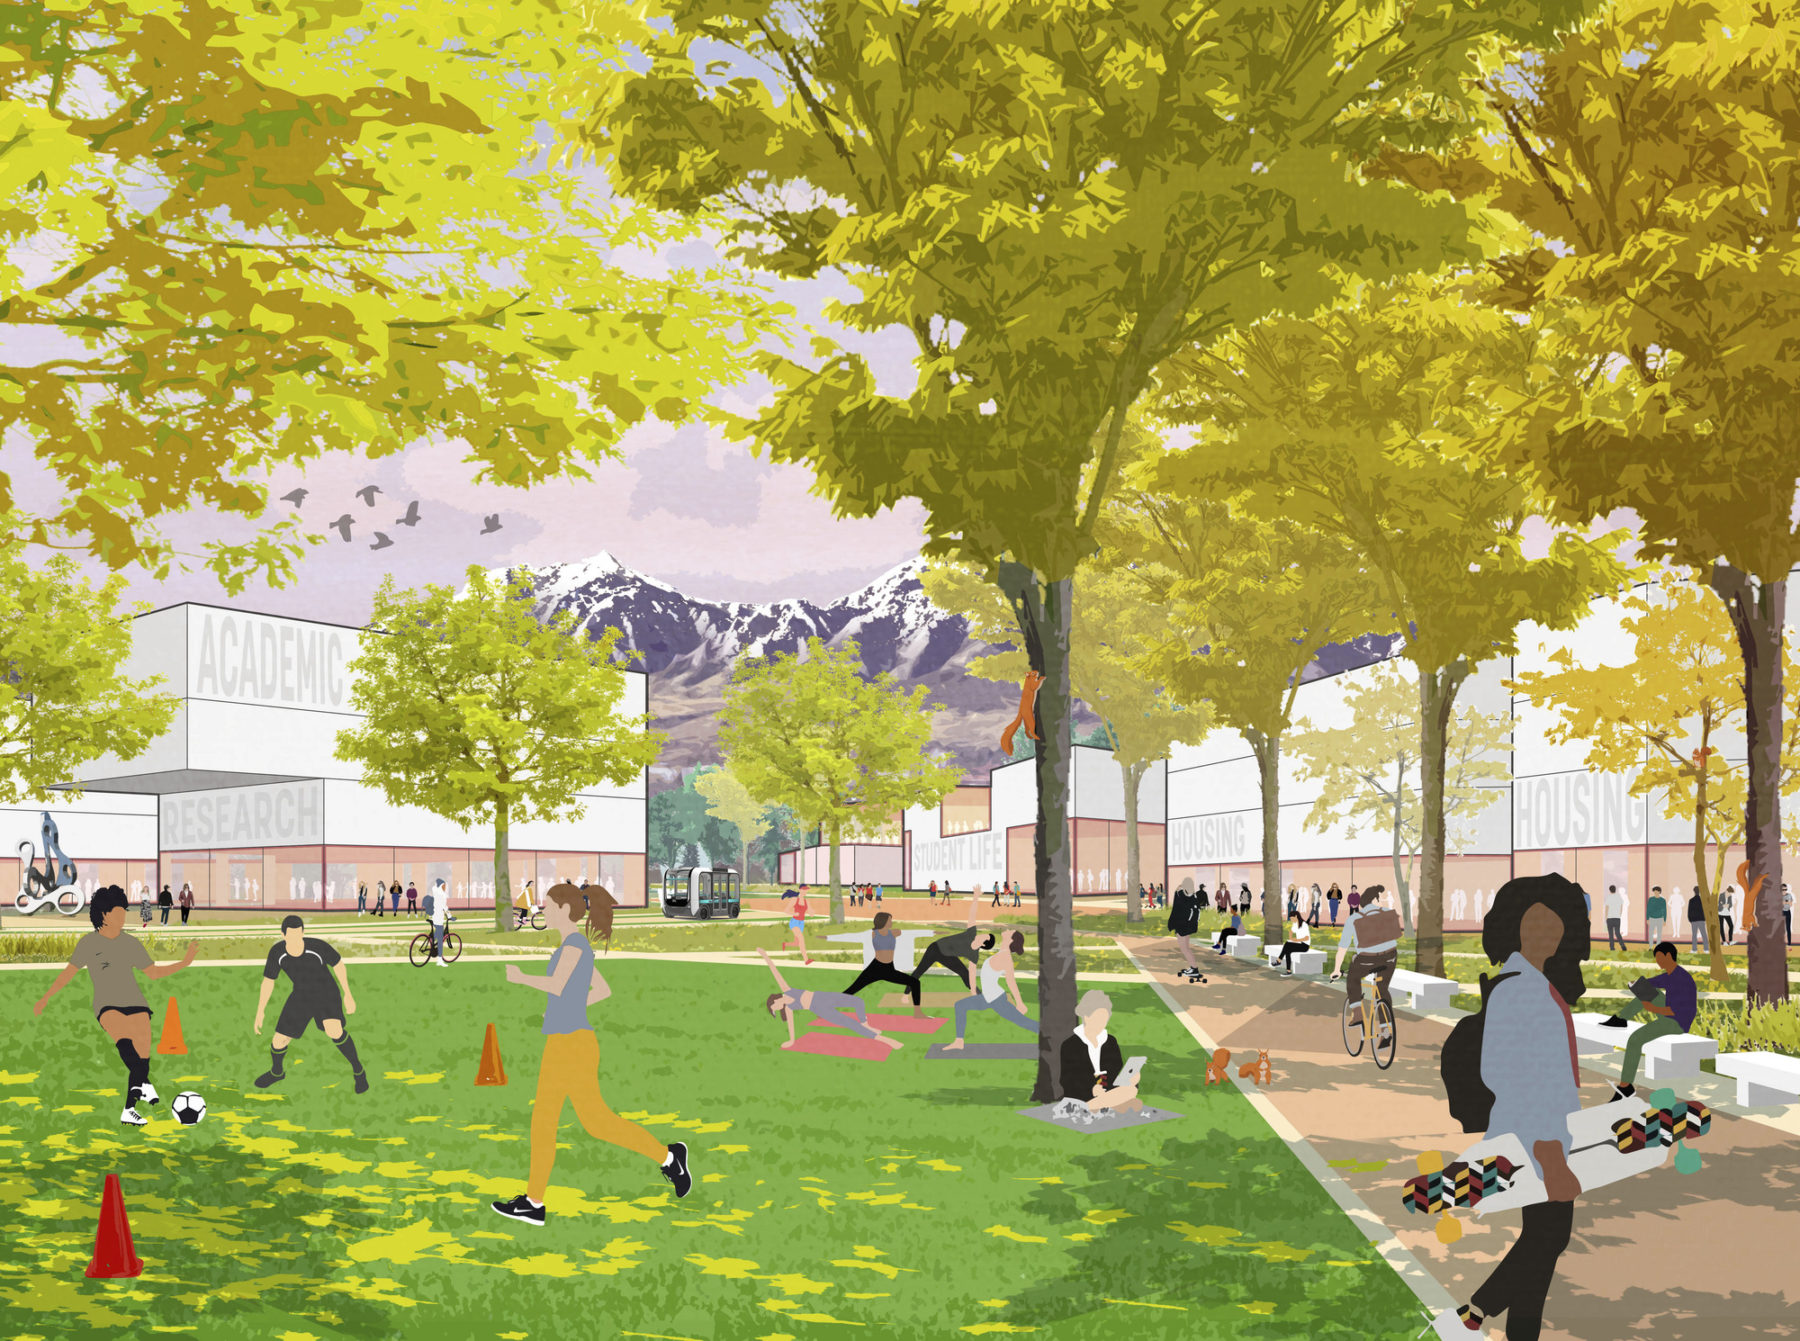 rendering of campus district - students enjoy leisure time in the quad